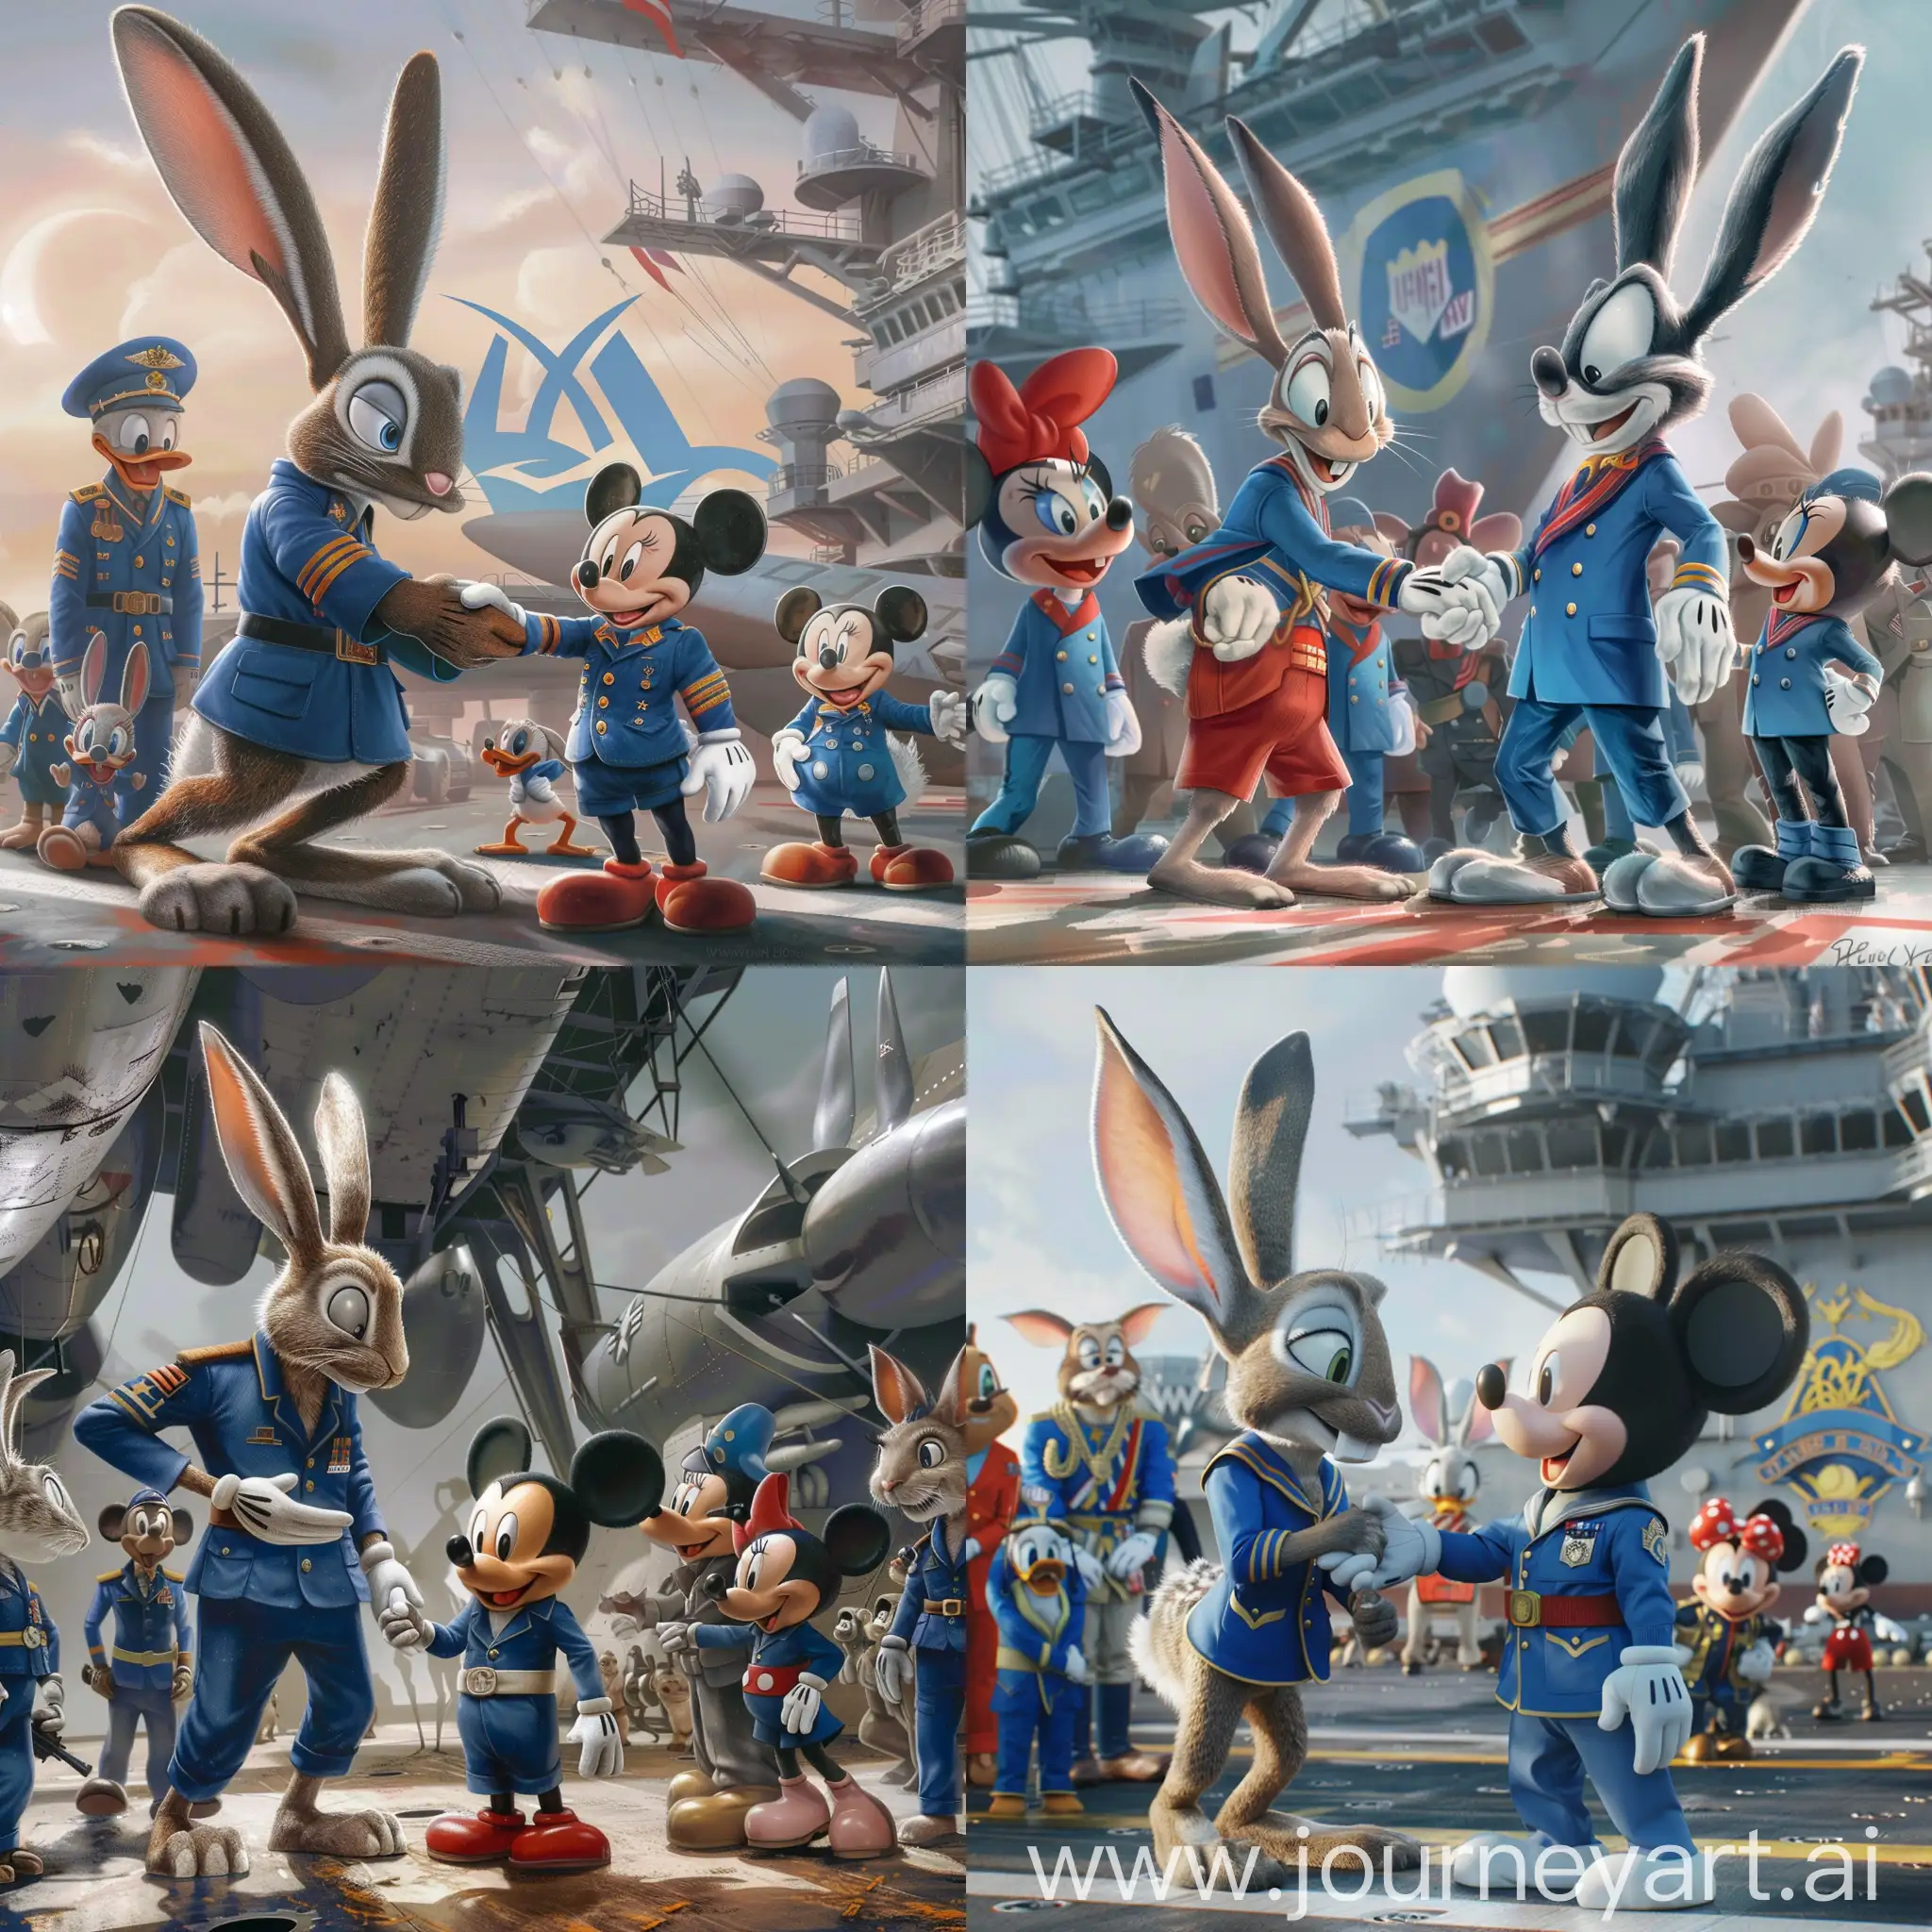 small cute rabbit Bugs Bunny is shaking hand with small cute Mickey Mouse. both are in blue military uniforms, on a US aircraft carrier. other animals are watching them. Warner bros and Disney logos are behind.